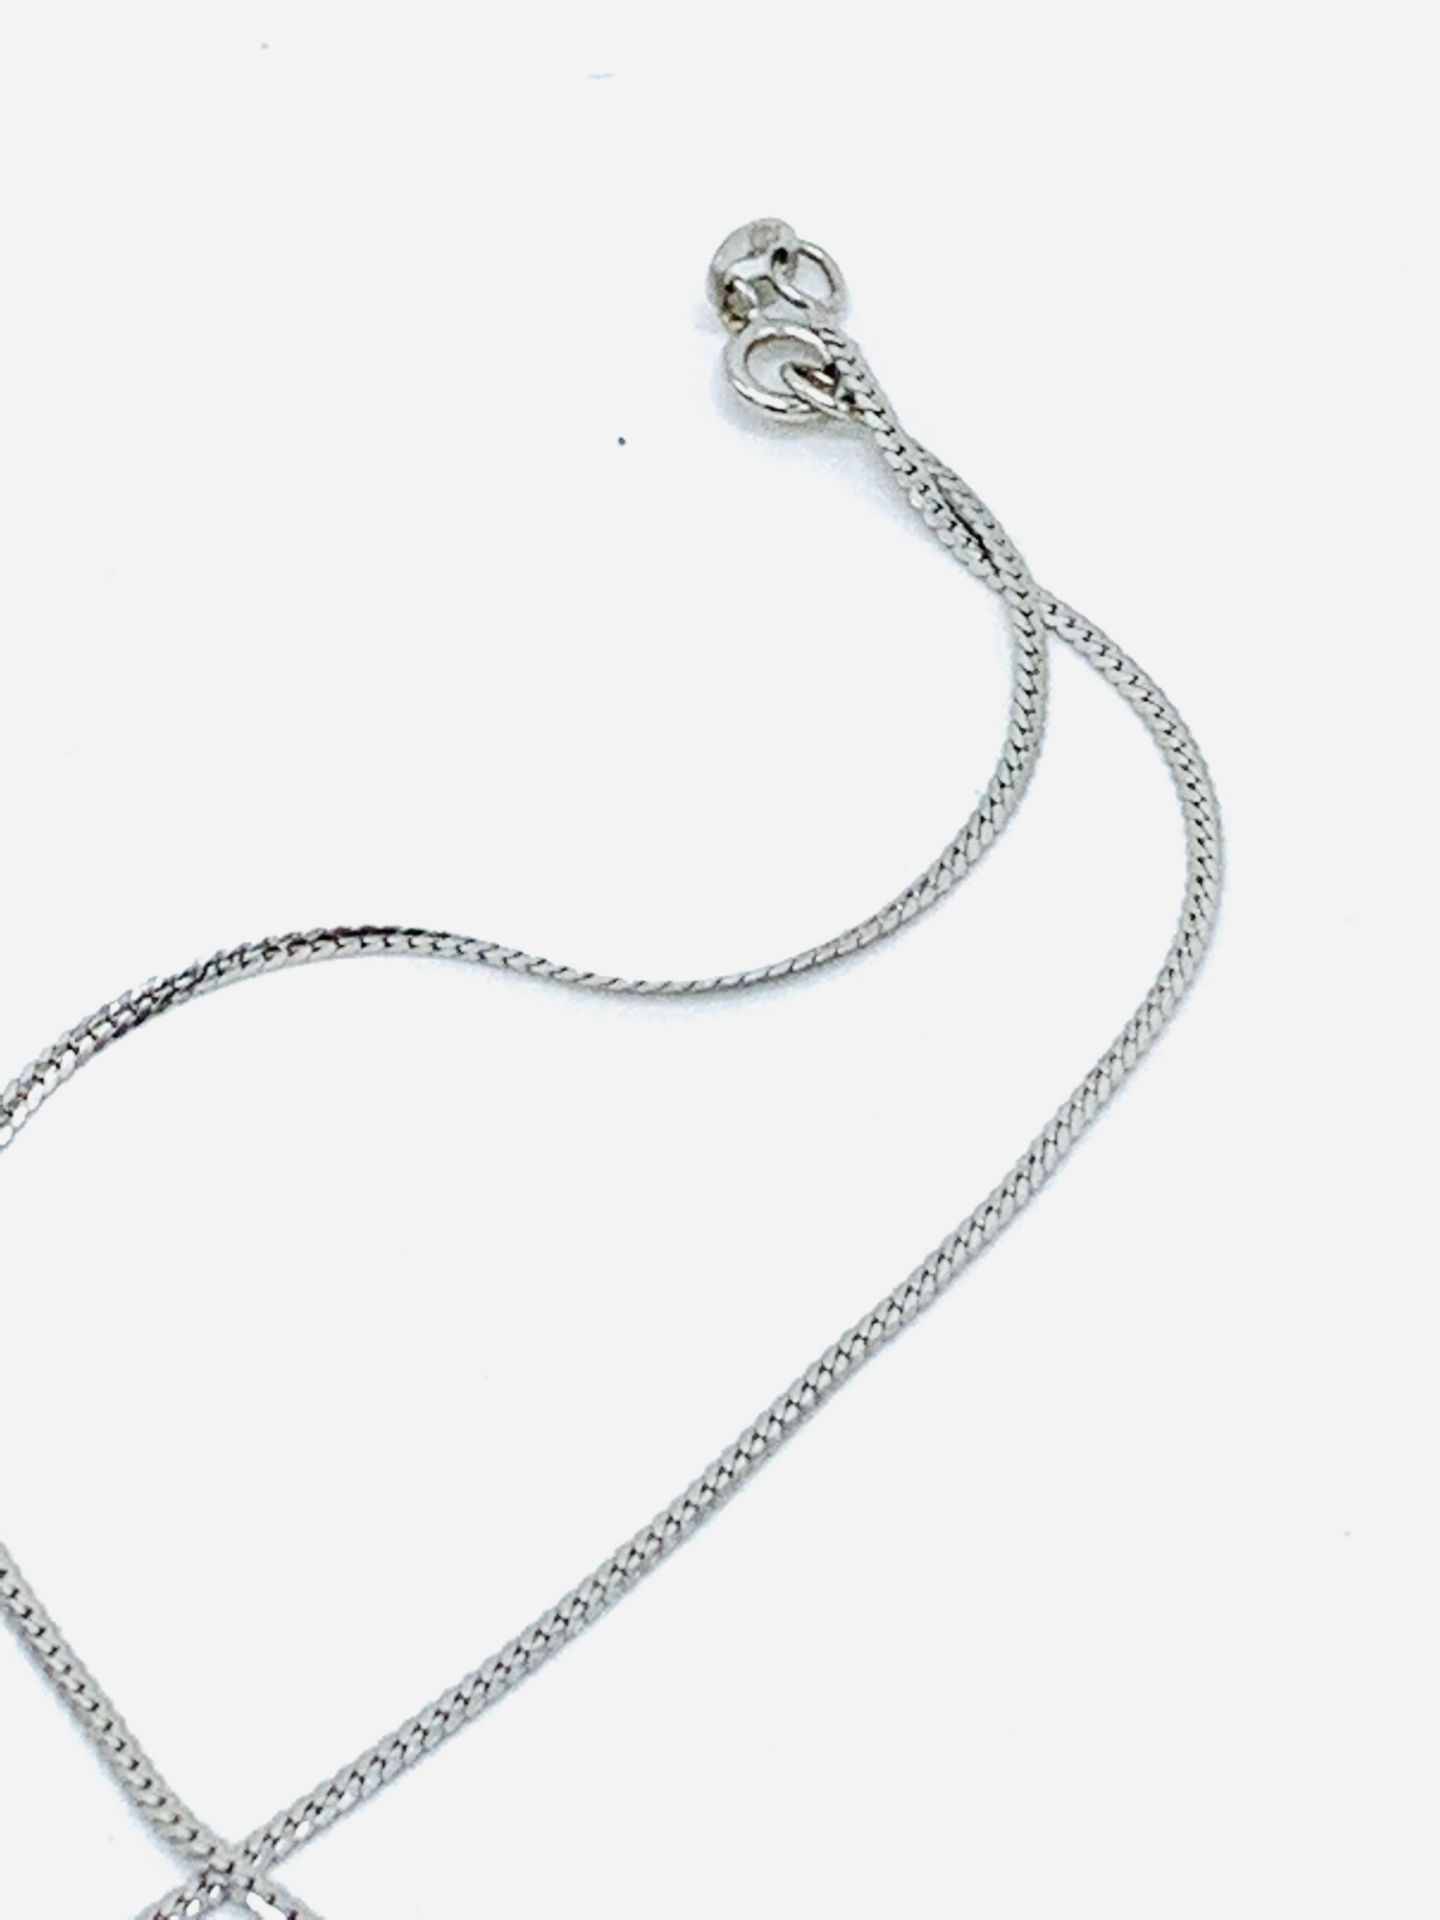 Contemporary white gold & diamond necklace. - Image 3 of 4